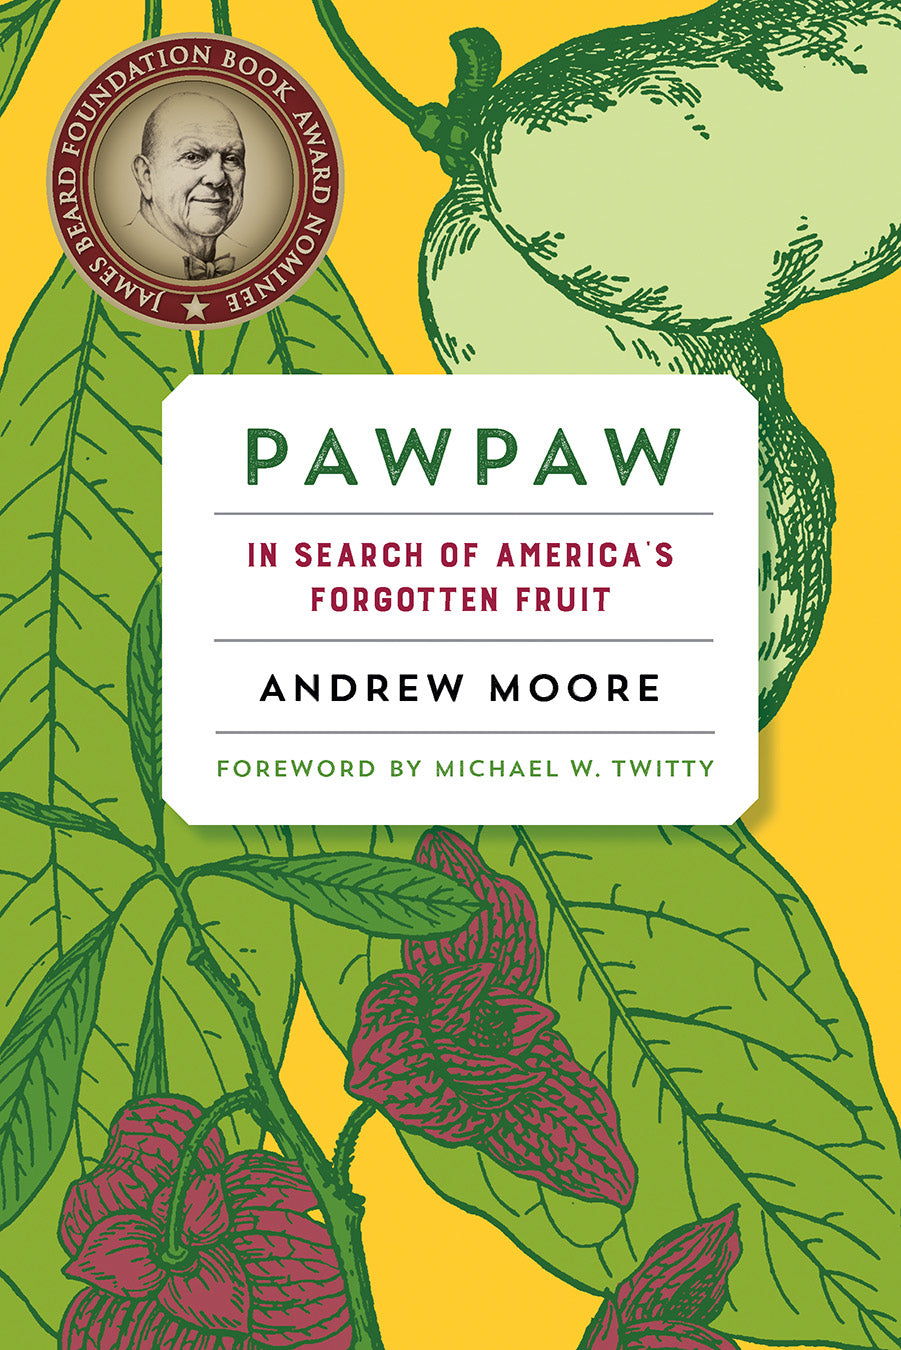 Pawpaw - In Search of America’s Forgotten Fruit